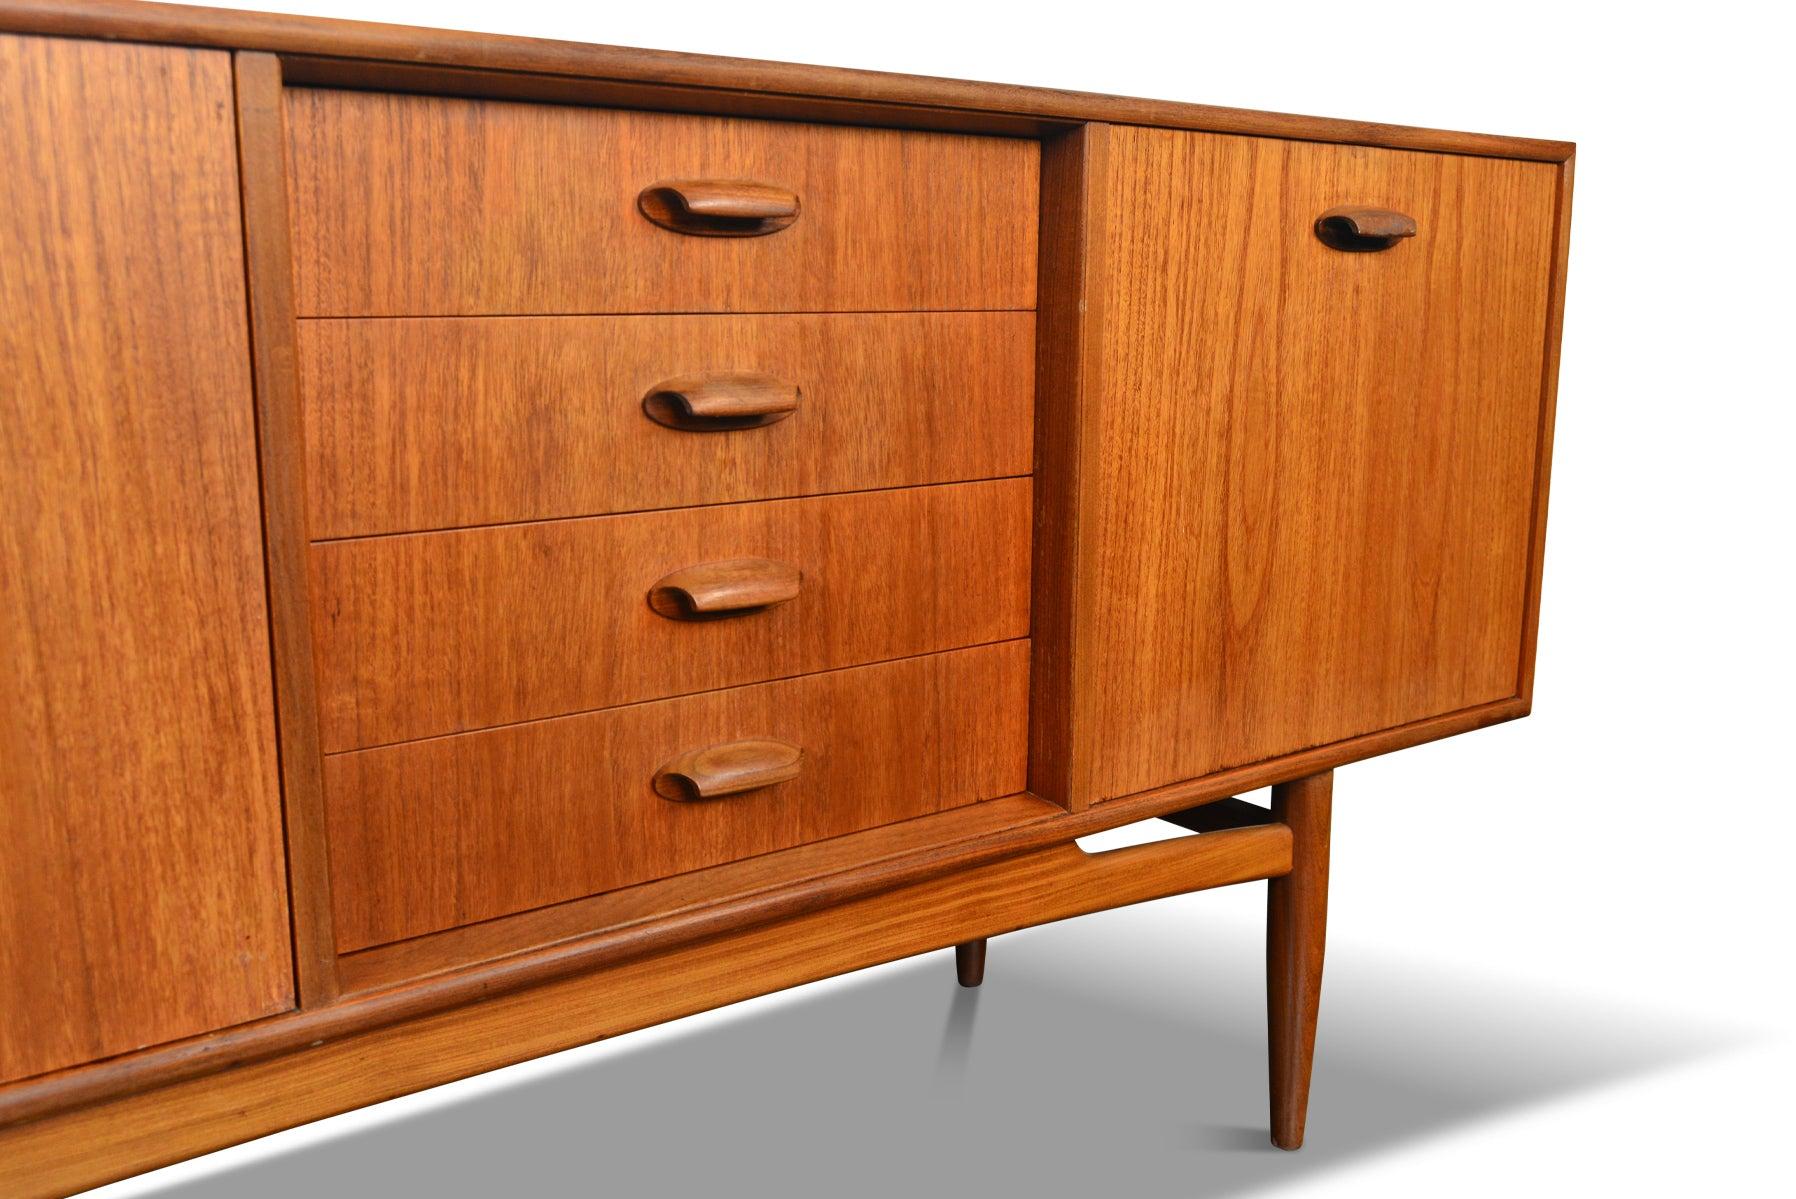 Origin: England
Designer: Victor B. Wilkins
Manufacturer: G Plan
Era: 1964
Materials: Teak, Afromosia
Measurements: 81? wide x 18? deep x 31? tall 

Condition: In excellent original condition with typical wear for its vintage. Price includes